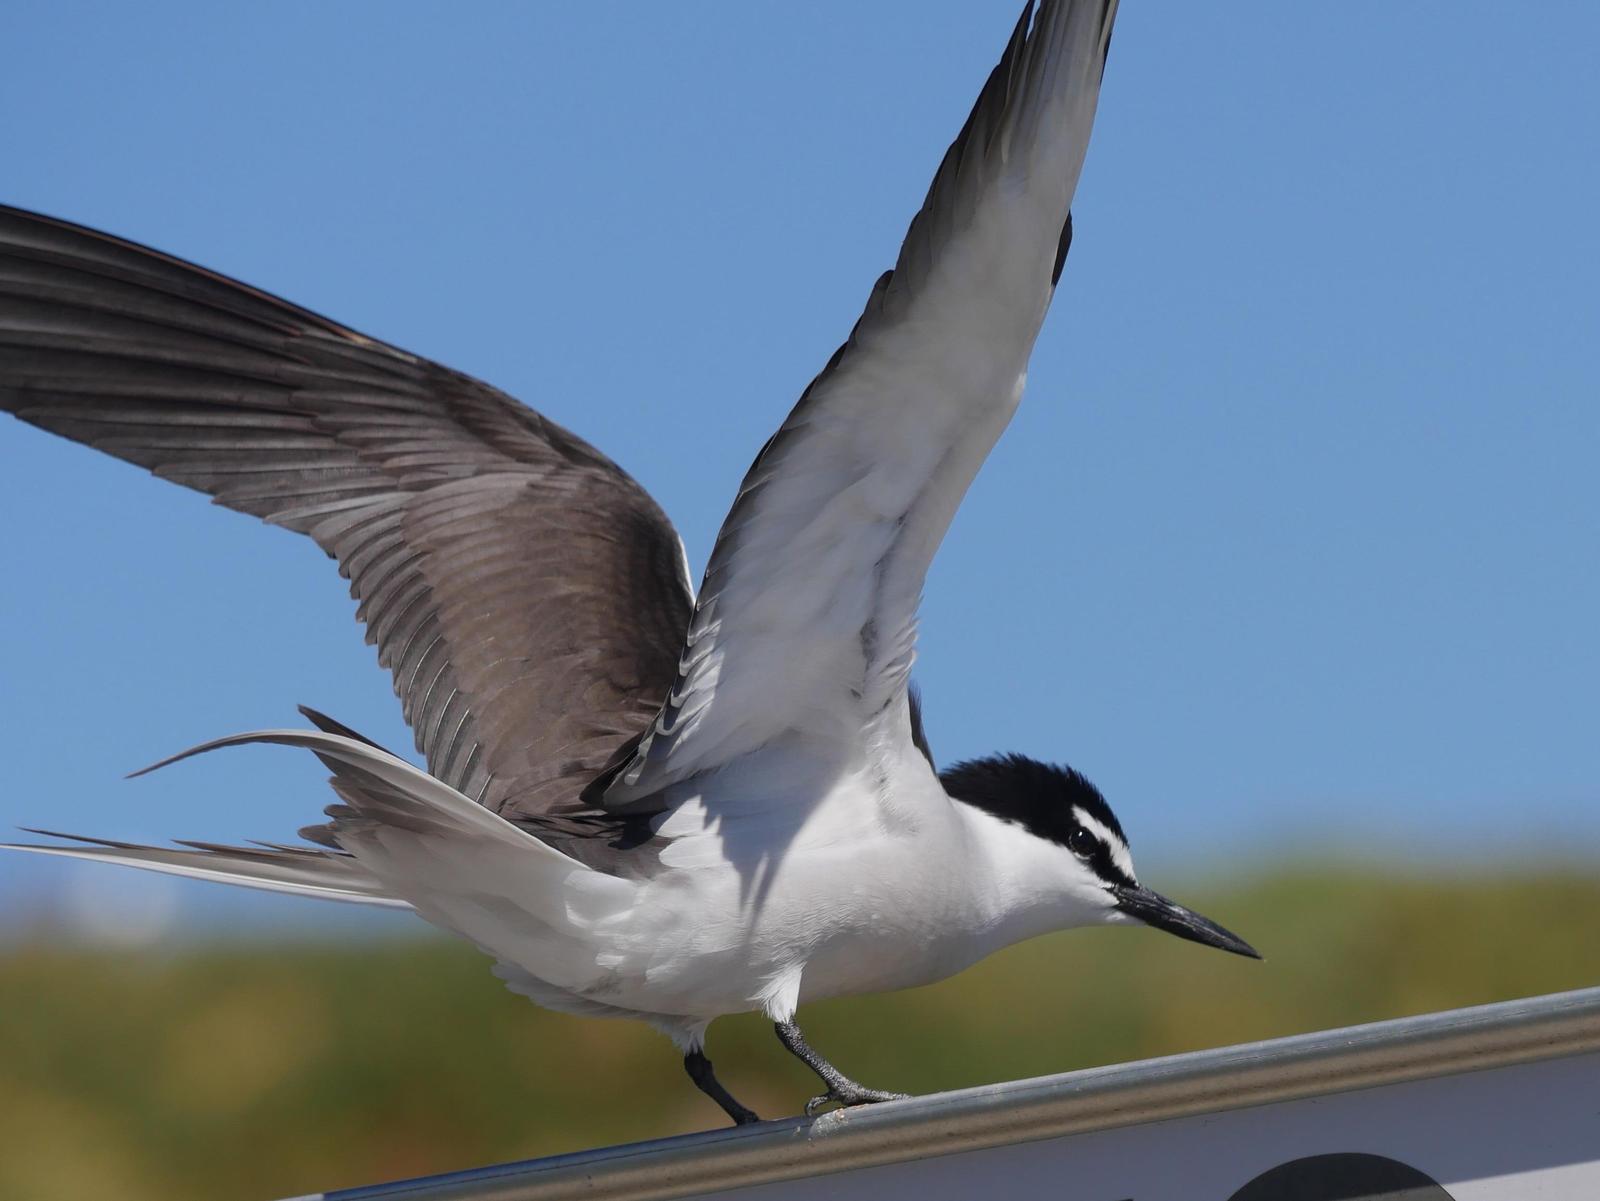 Bridled Tern Photo by Peter Lowe